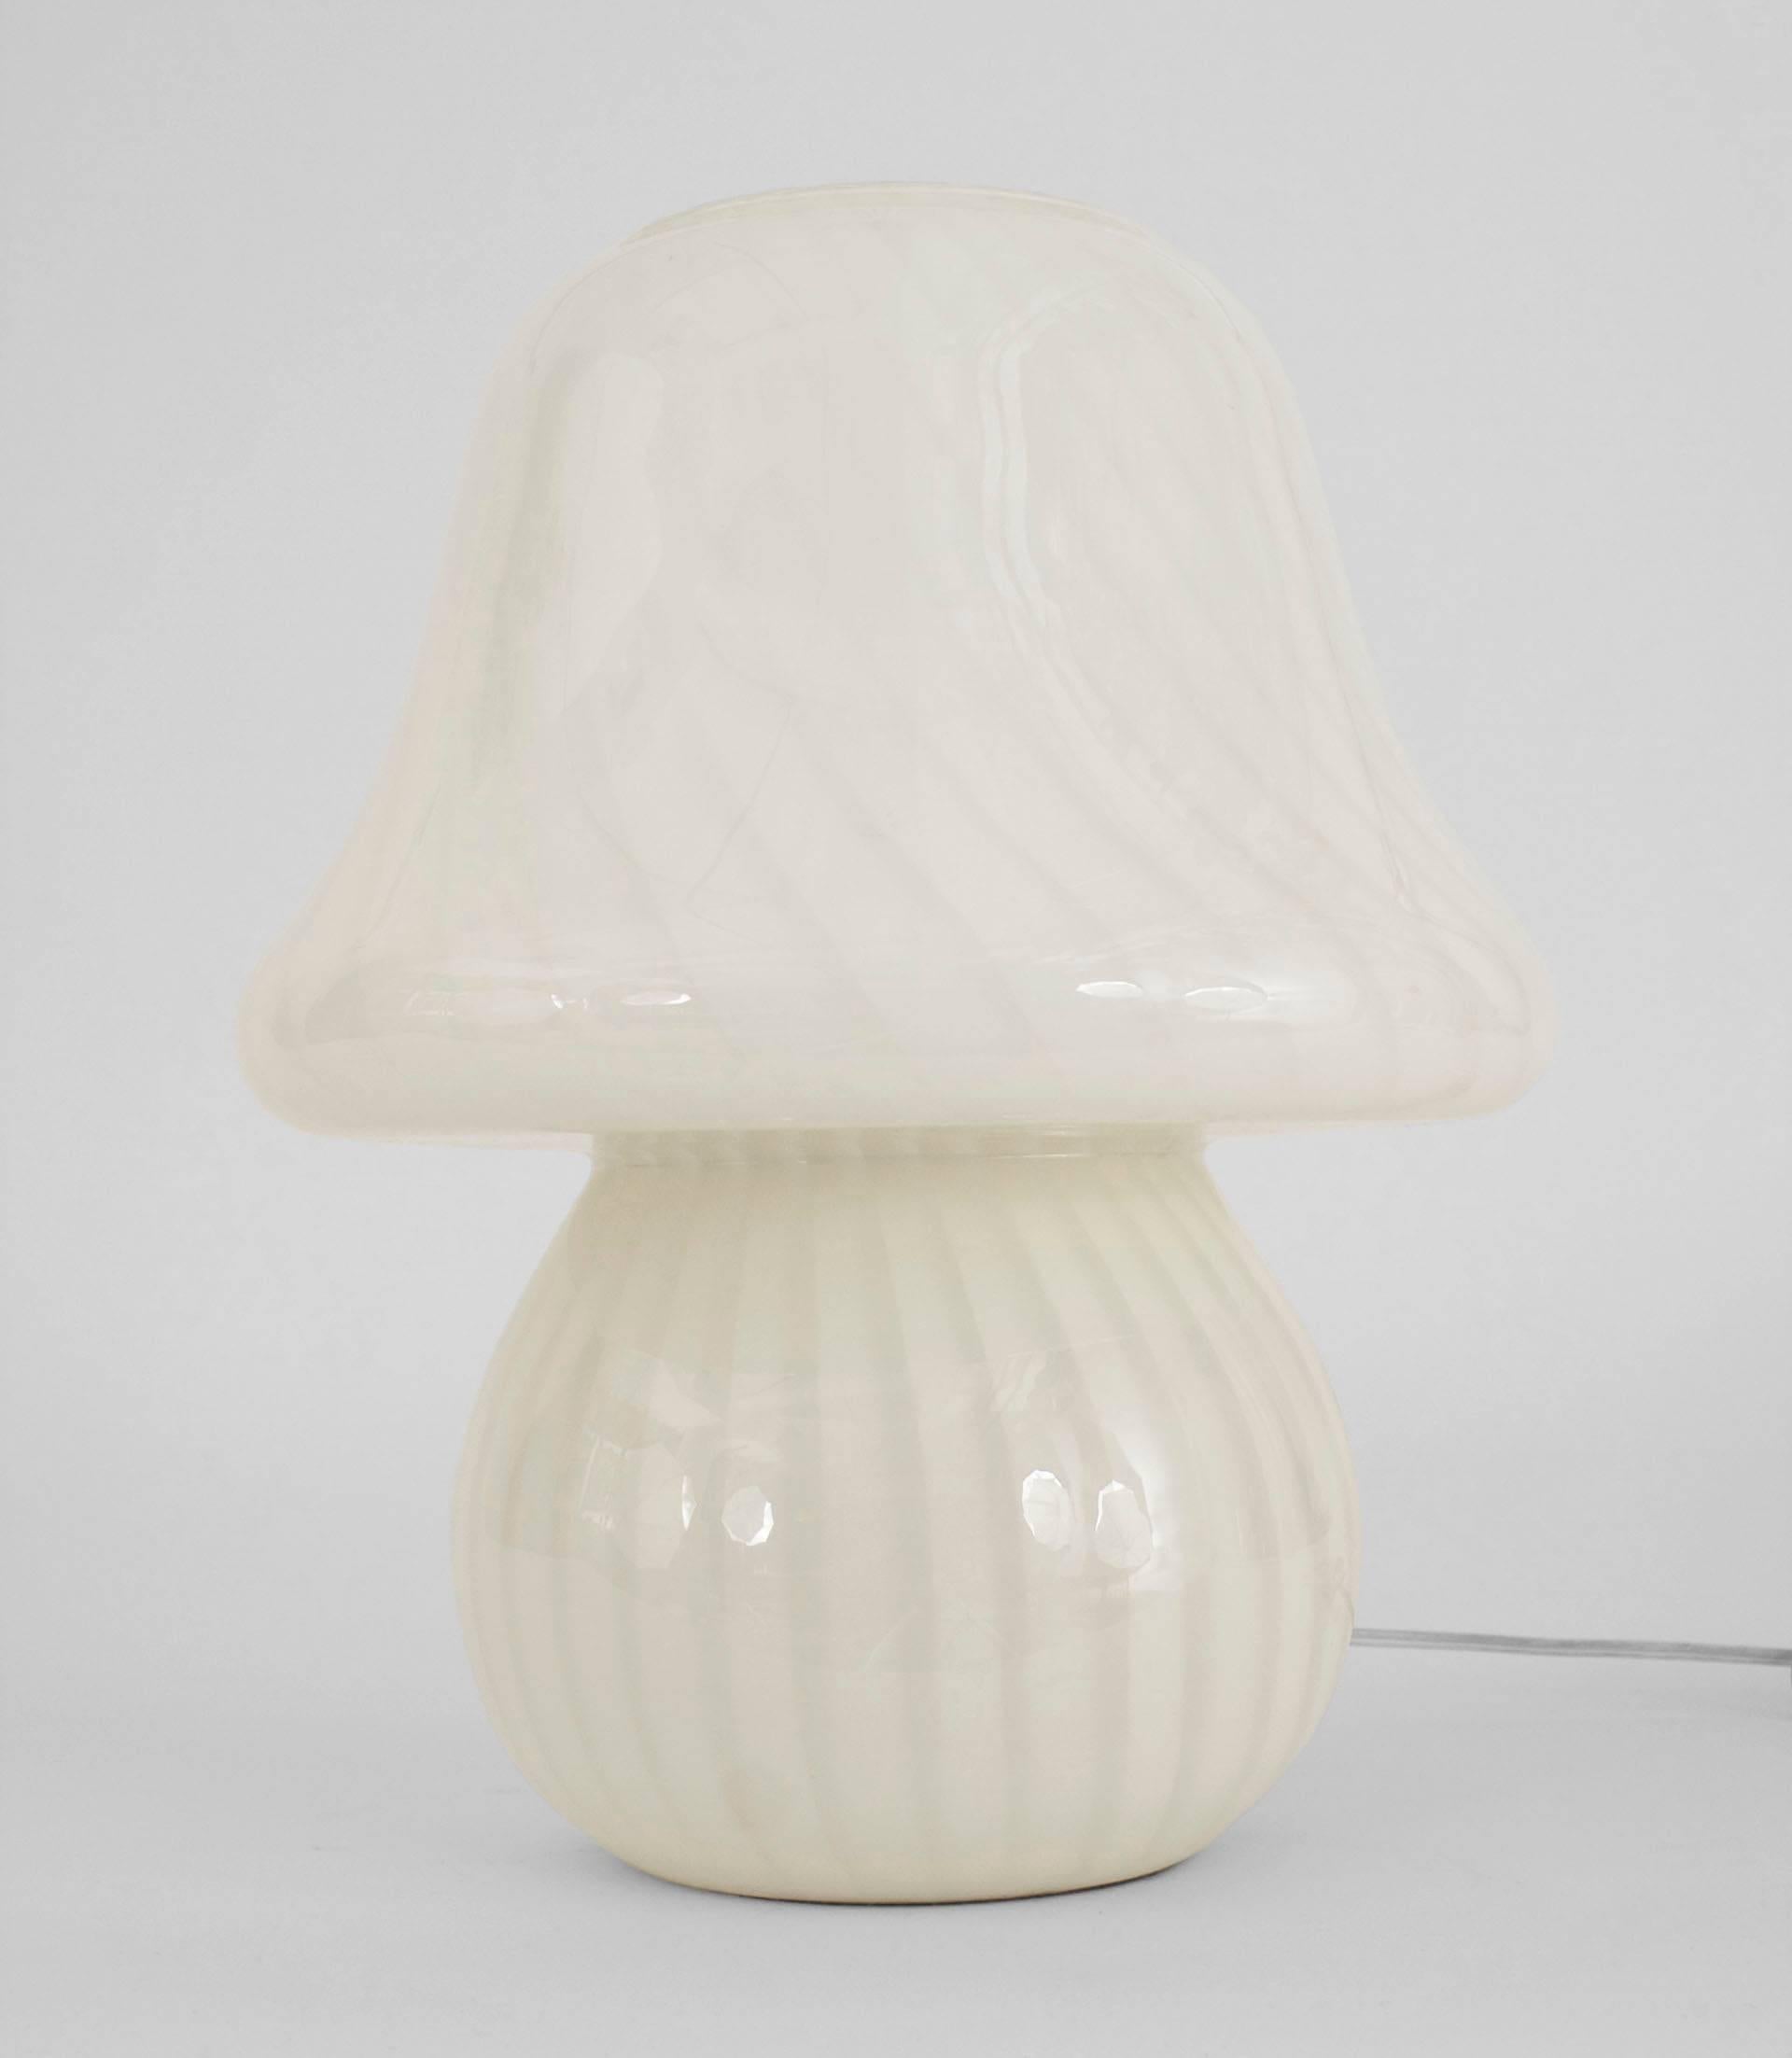 Pair of Mid-Century Italian Murano swirl design white glass table lamps having a round ball base under a mushroom shape shade with an open top.